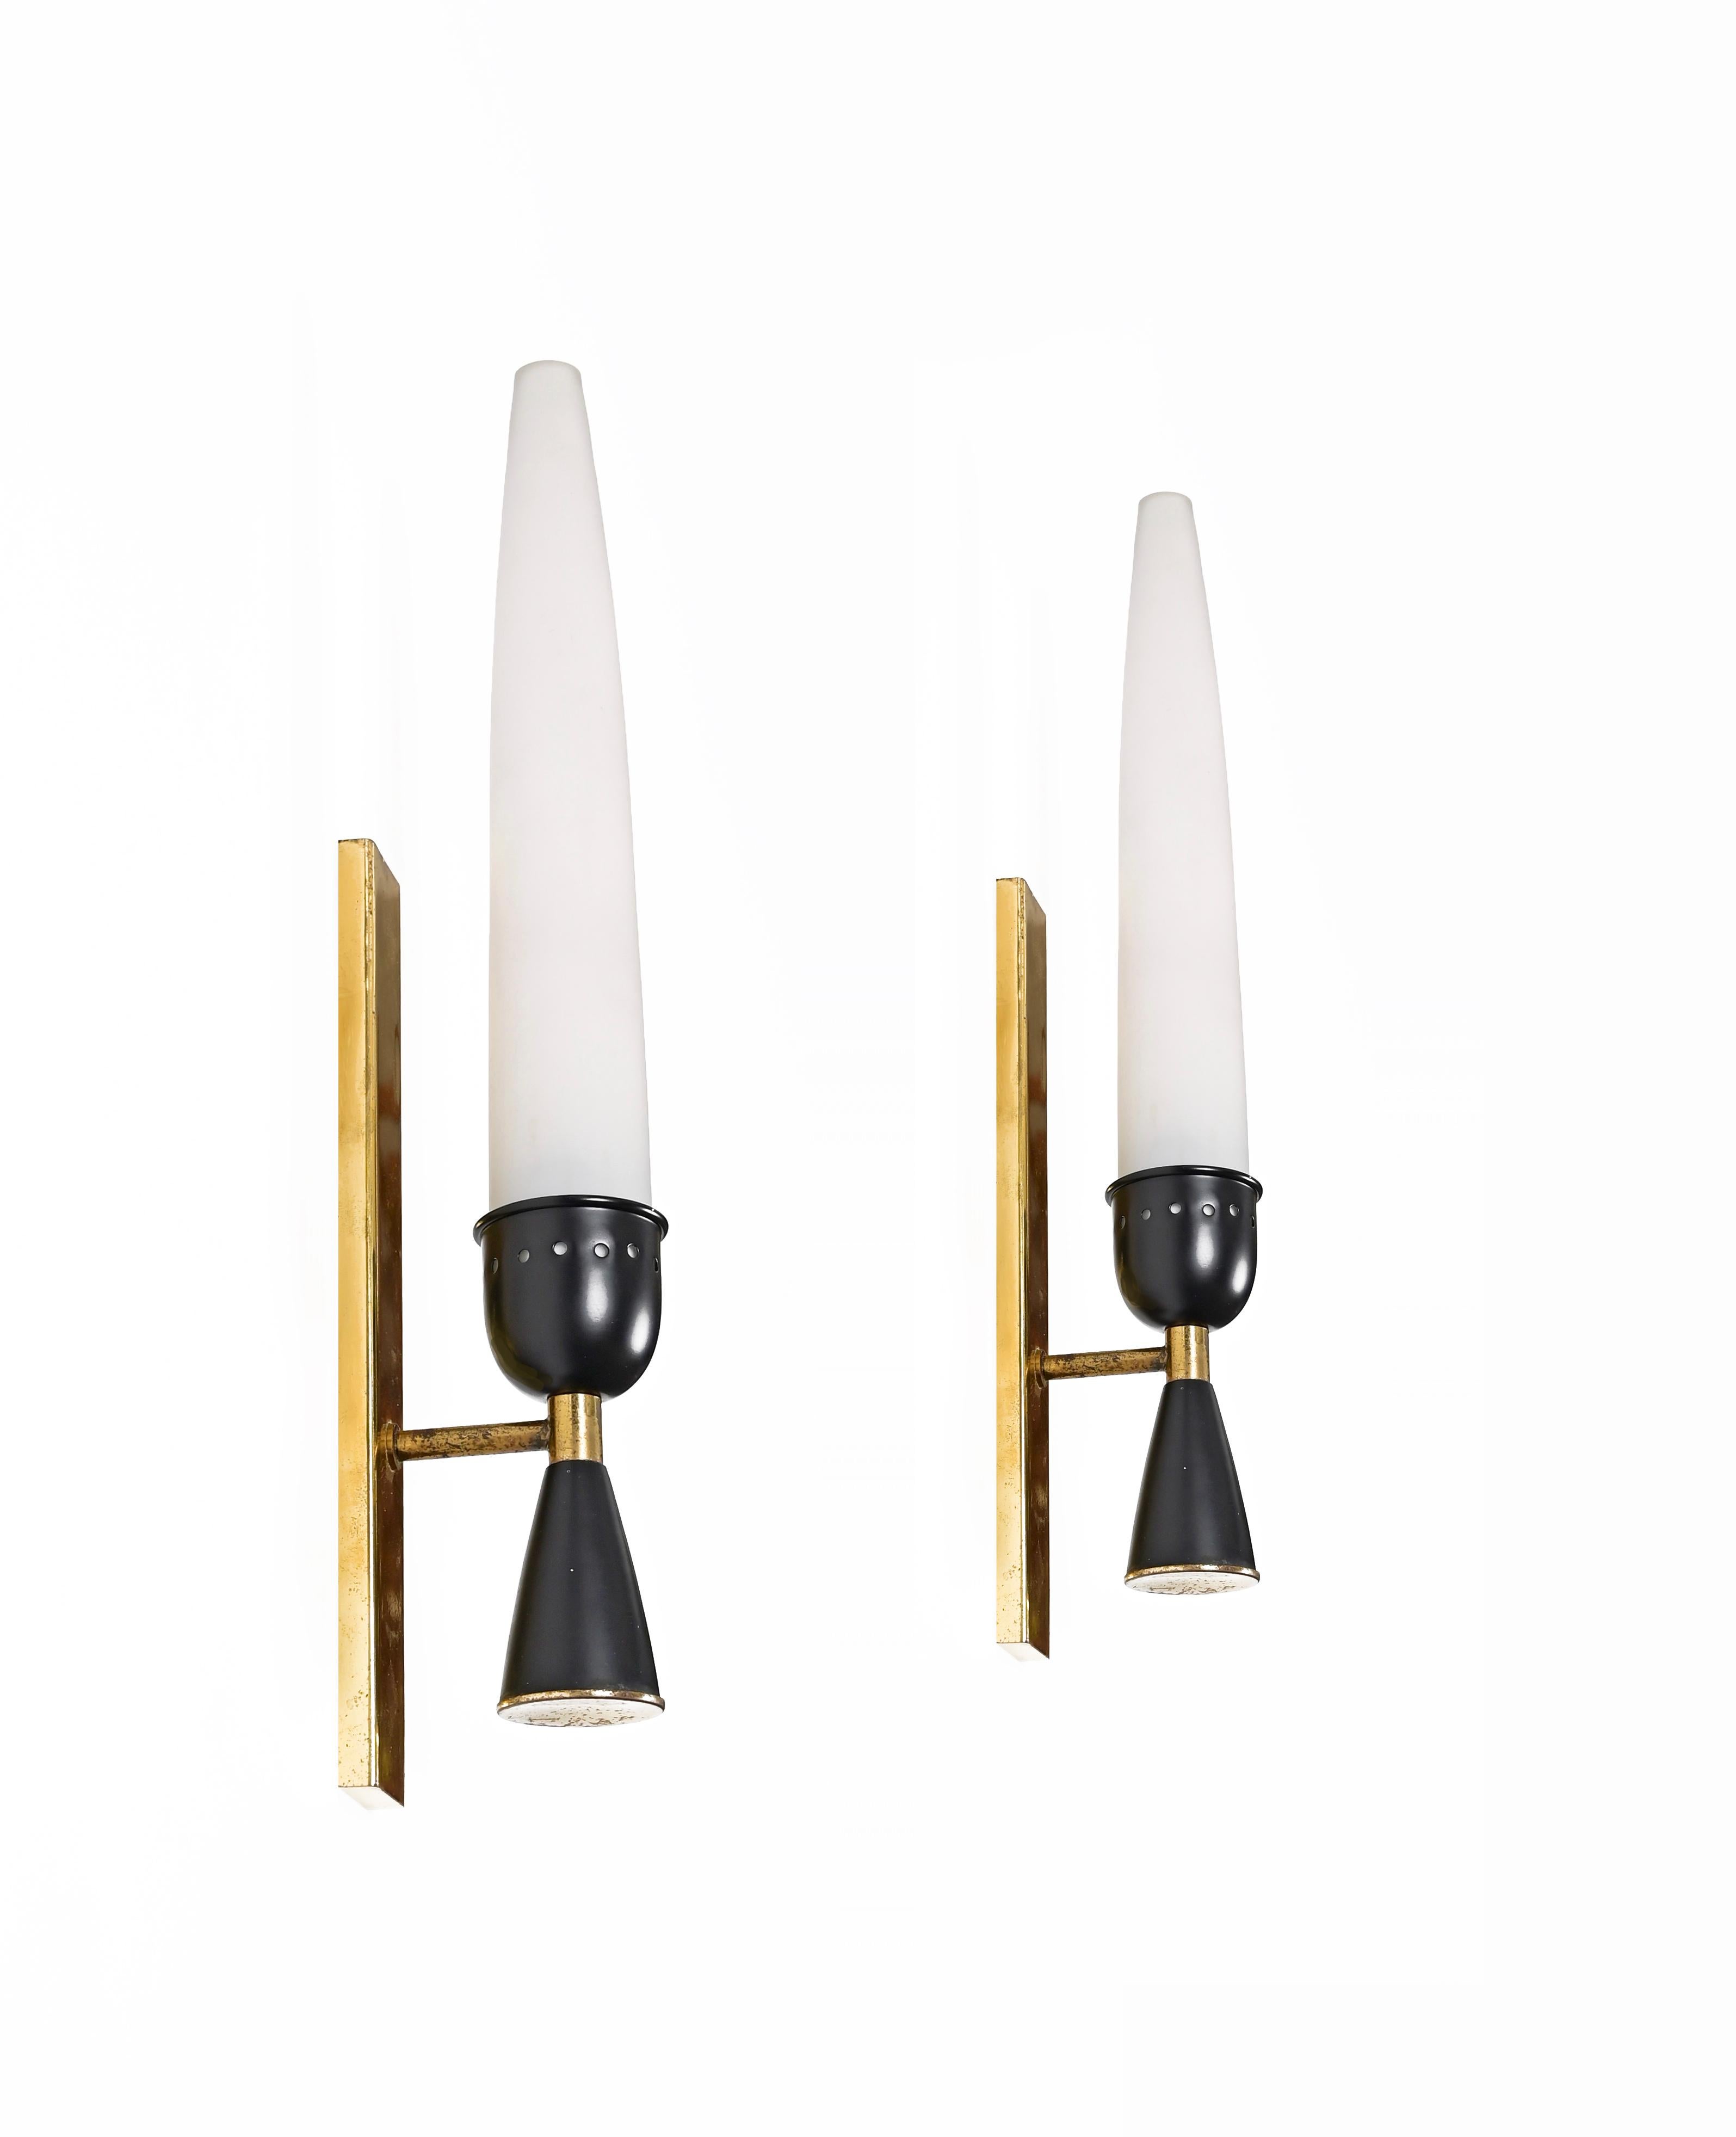 Enameled Pair of Mid-Century Stilnovo Opal Glass and Brass Italian Sconces, 1950s For Sale